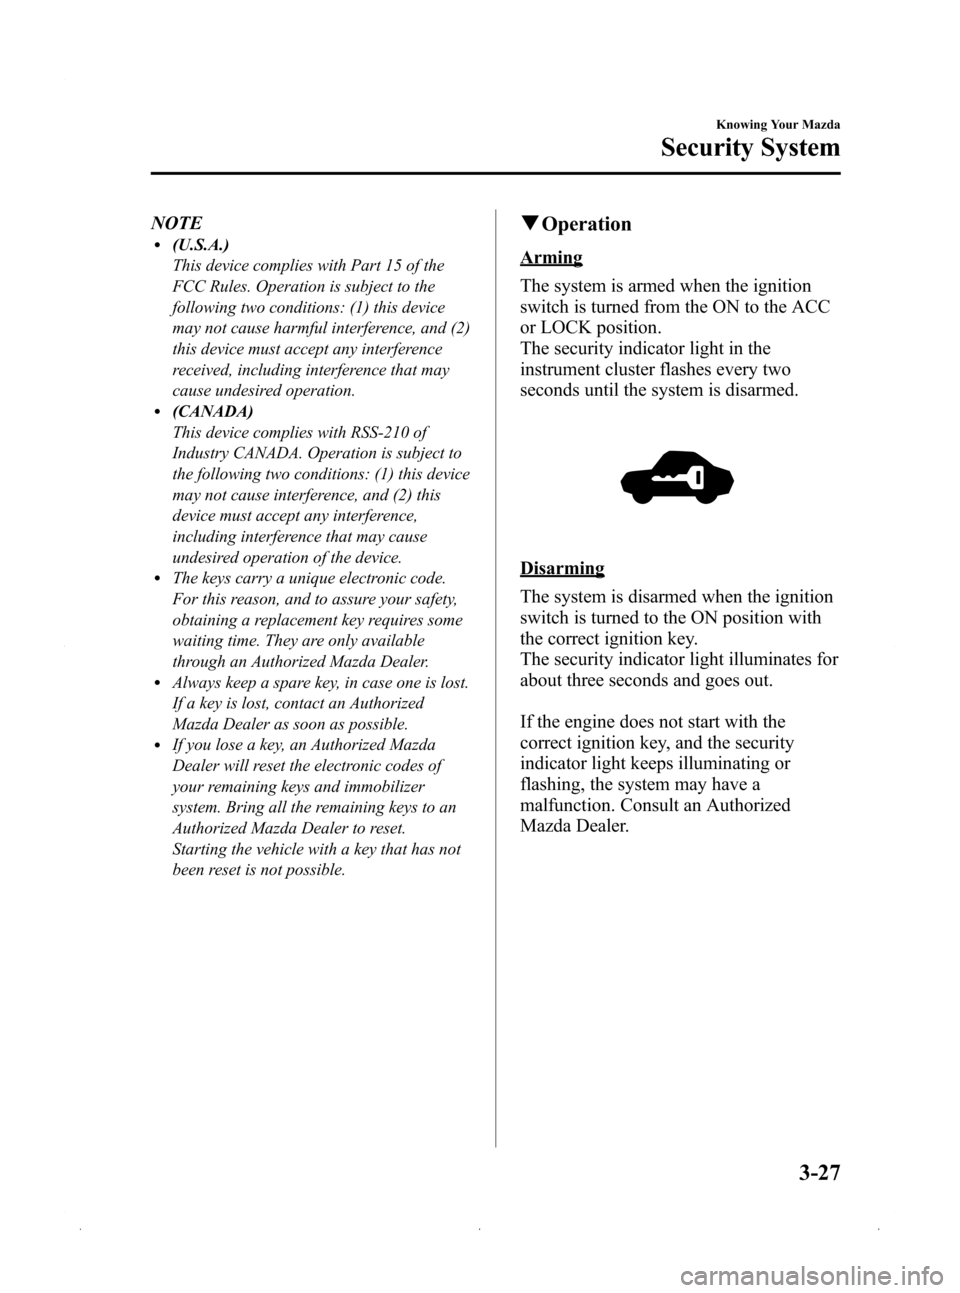 MAZDA MODEL 3 HATCHBACK 2009  Owners Manual (in English) Black plate (101,1)
NOTEl(U.S.A.)
This device complies with Part 15 of the
FCC Rules. Operation is subject to the
following two conditions: (1) this device
may not cause harmful interference, and (2)
